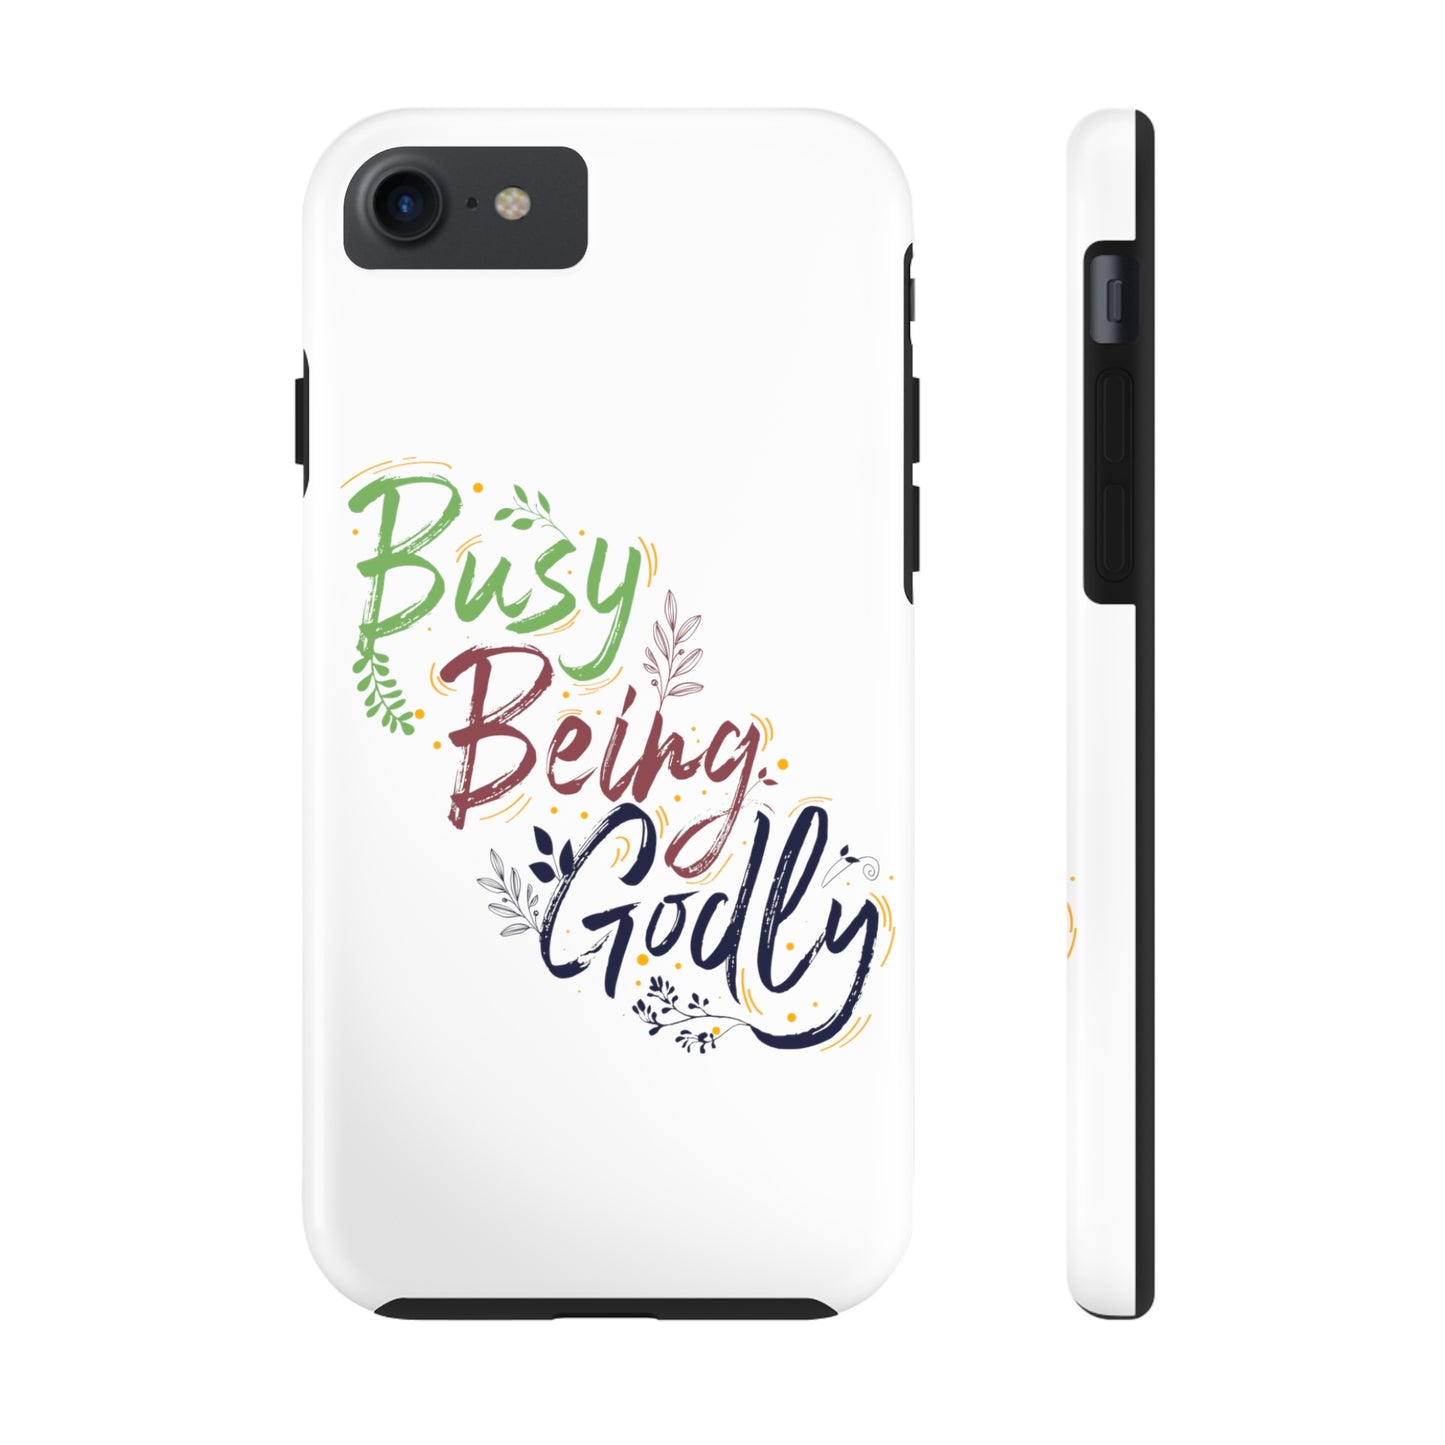 Busy Being Godly Tough Phone Cases, Case-Mate